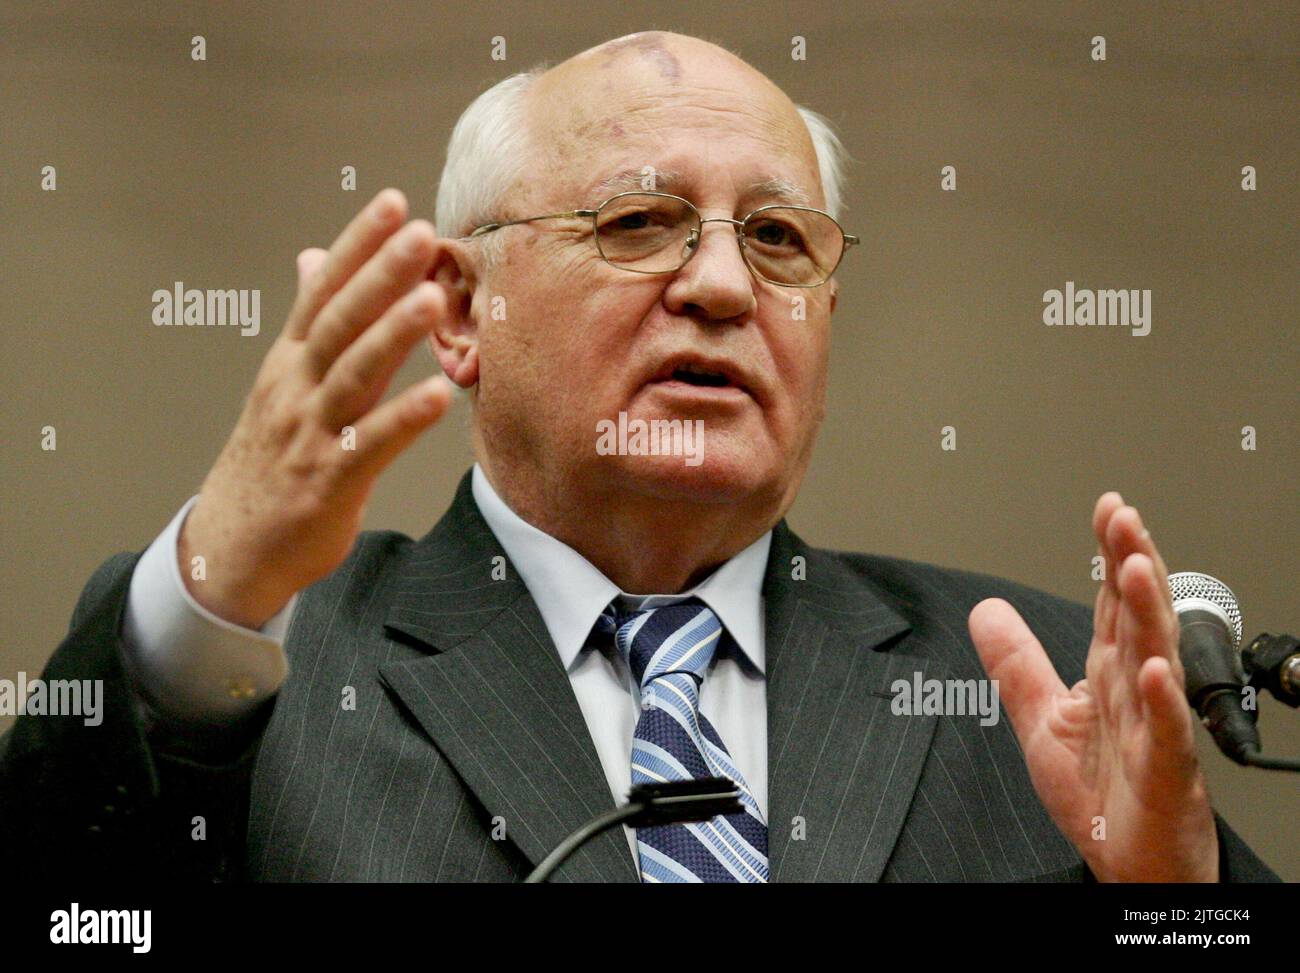 Irving, USA. 08th Oct, 2007. Mikhail Gorbachev, former president of the Soviet Union, speaks with students at the University of Dallas on Monday, October 8, 2007, in Dallas, Texas. (Photo by Richard W. Rodriguez/Fort Worth Star-Telegram/MCT/Sipa USA) Credit: Sipa USA/Alamy Live News Stock Photo